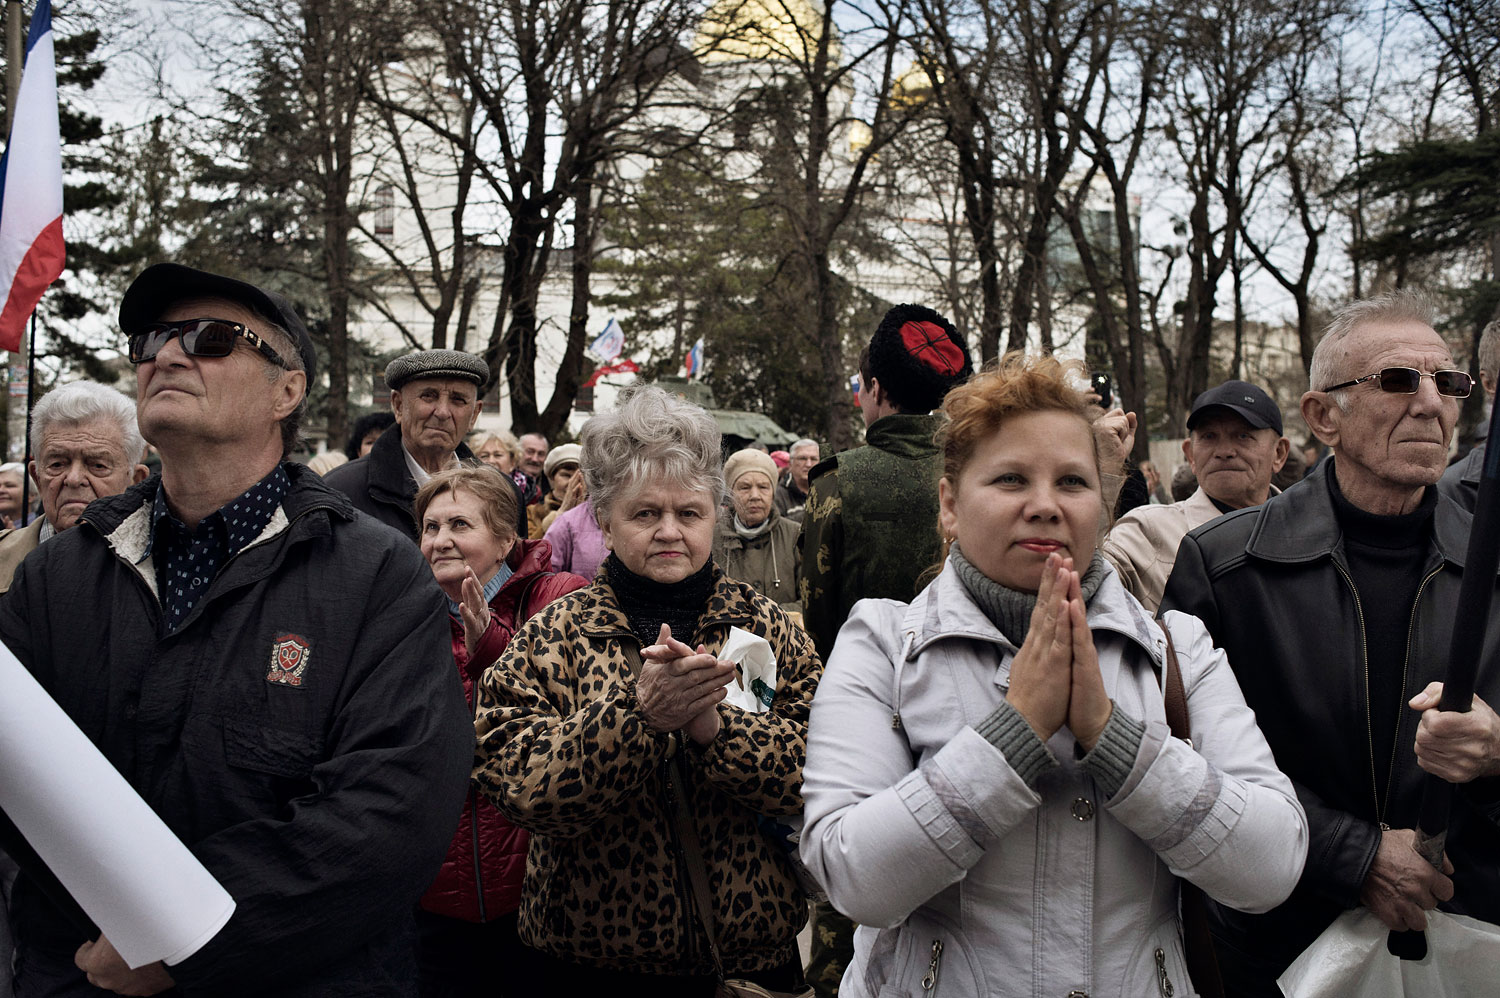 Pro-Russian demonstrators rally in front of the local parliament building in Crimea's capital Simferopol, March 6, 2014.